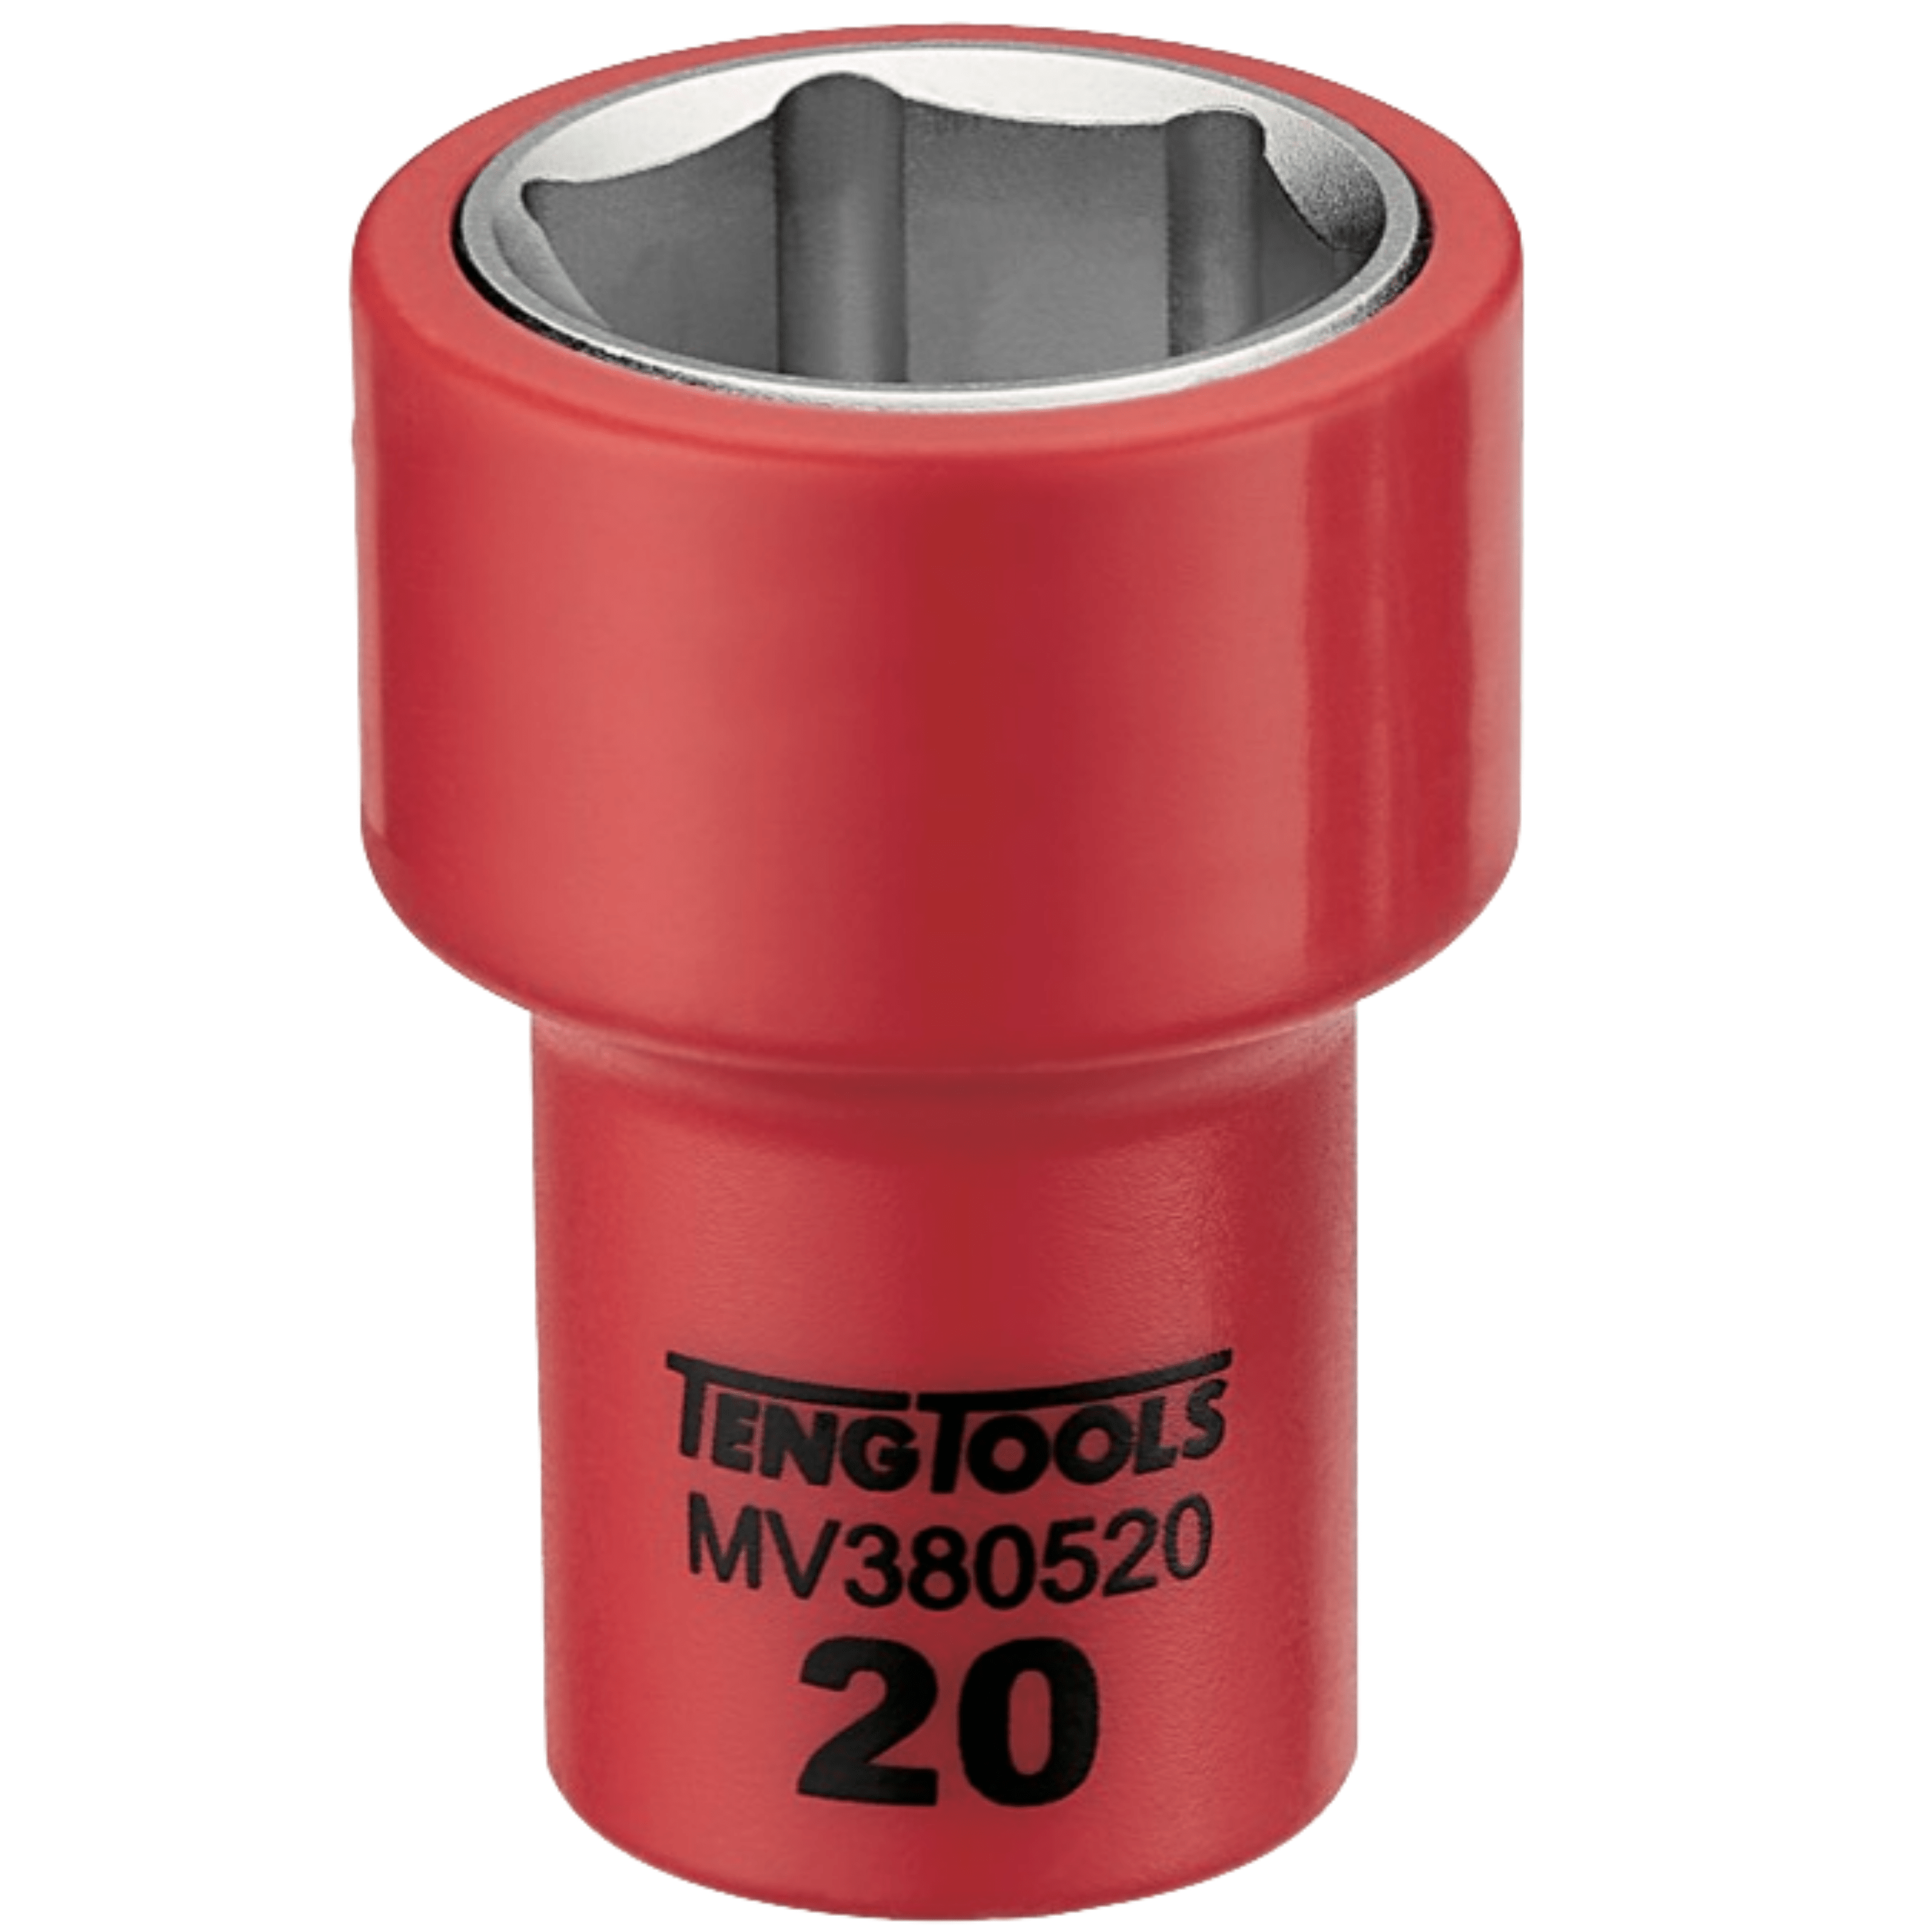 Teng Tools 3/8 Inch Drive Metric 6 Point 1000 Volt Shallow Insulated Sockets - 7mm